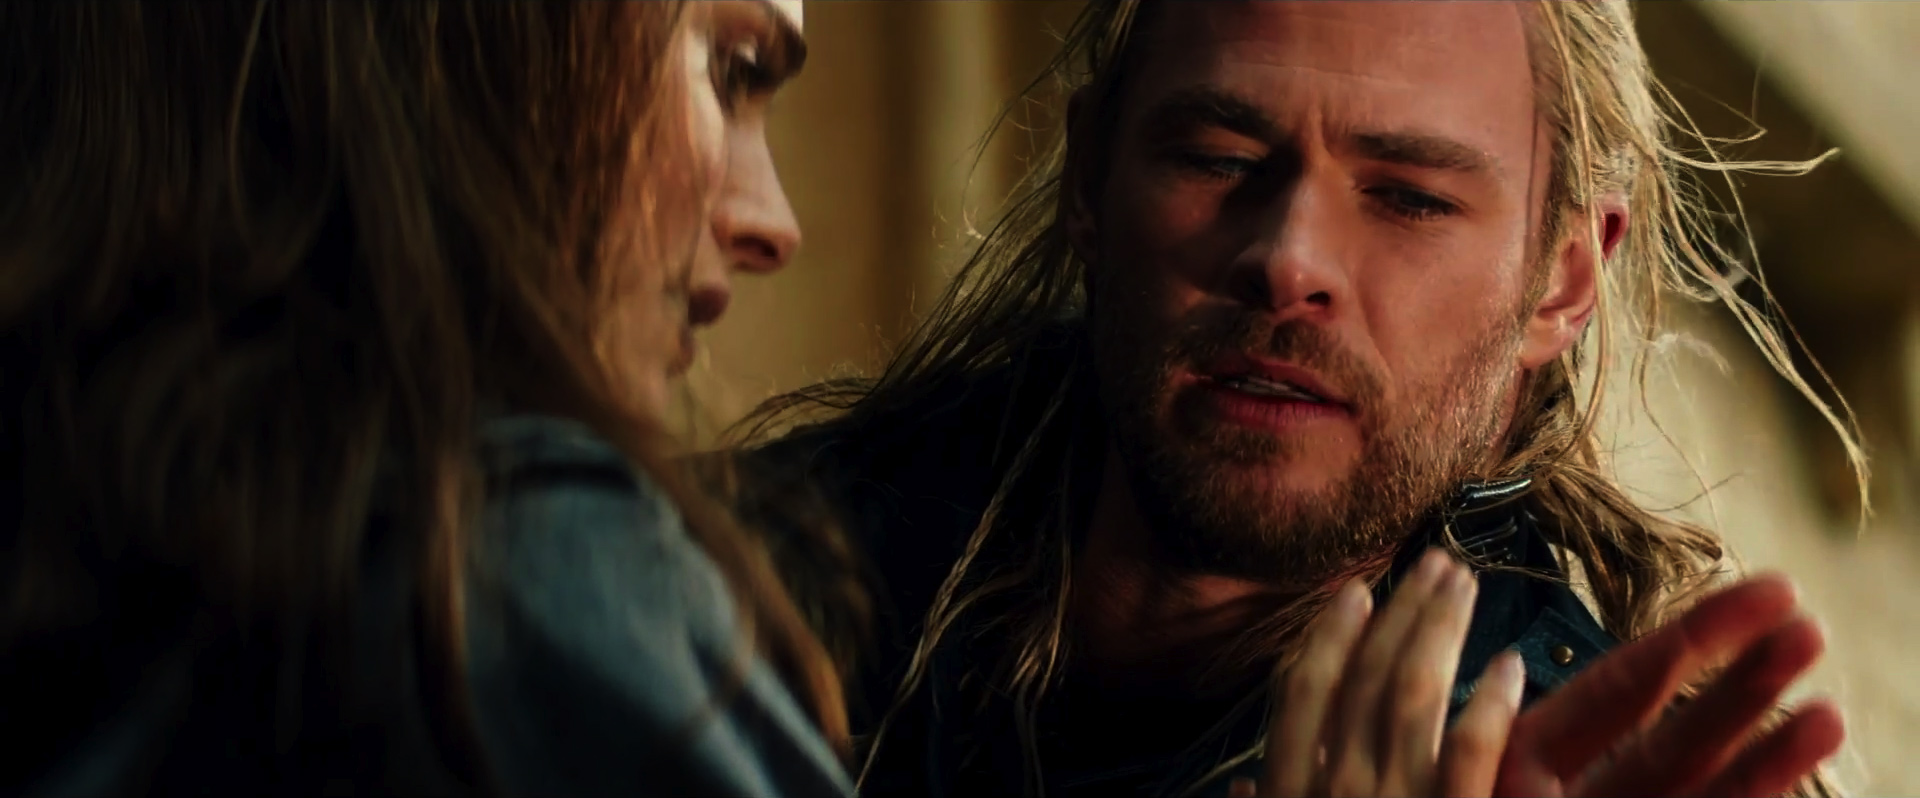 thor-the-dark-world-epic-tv-spot-with-lots-of-new-footage-02.jpg